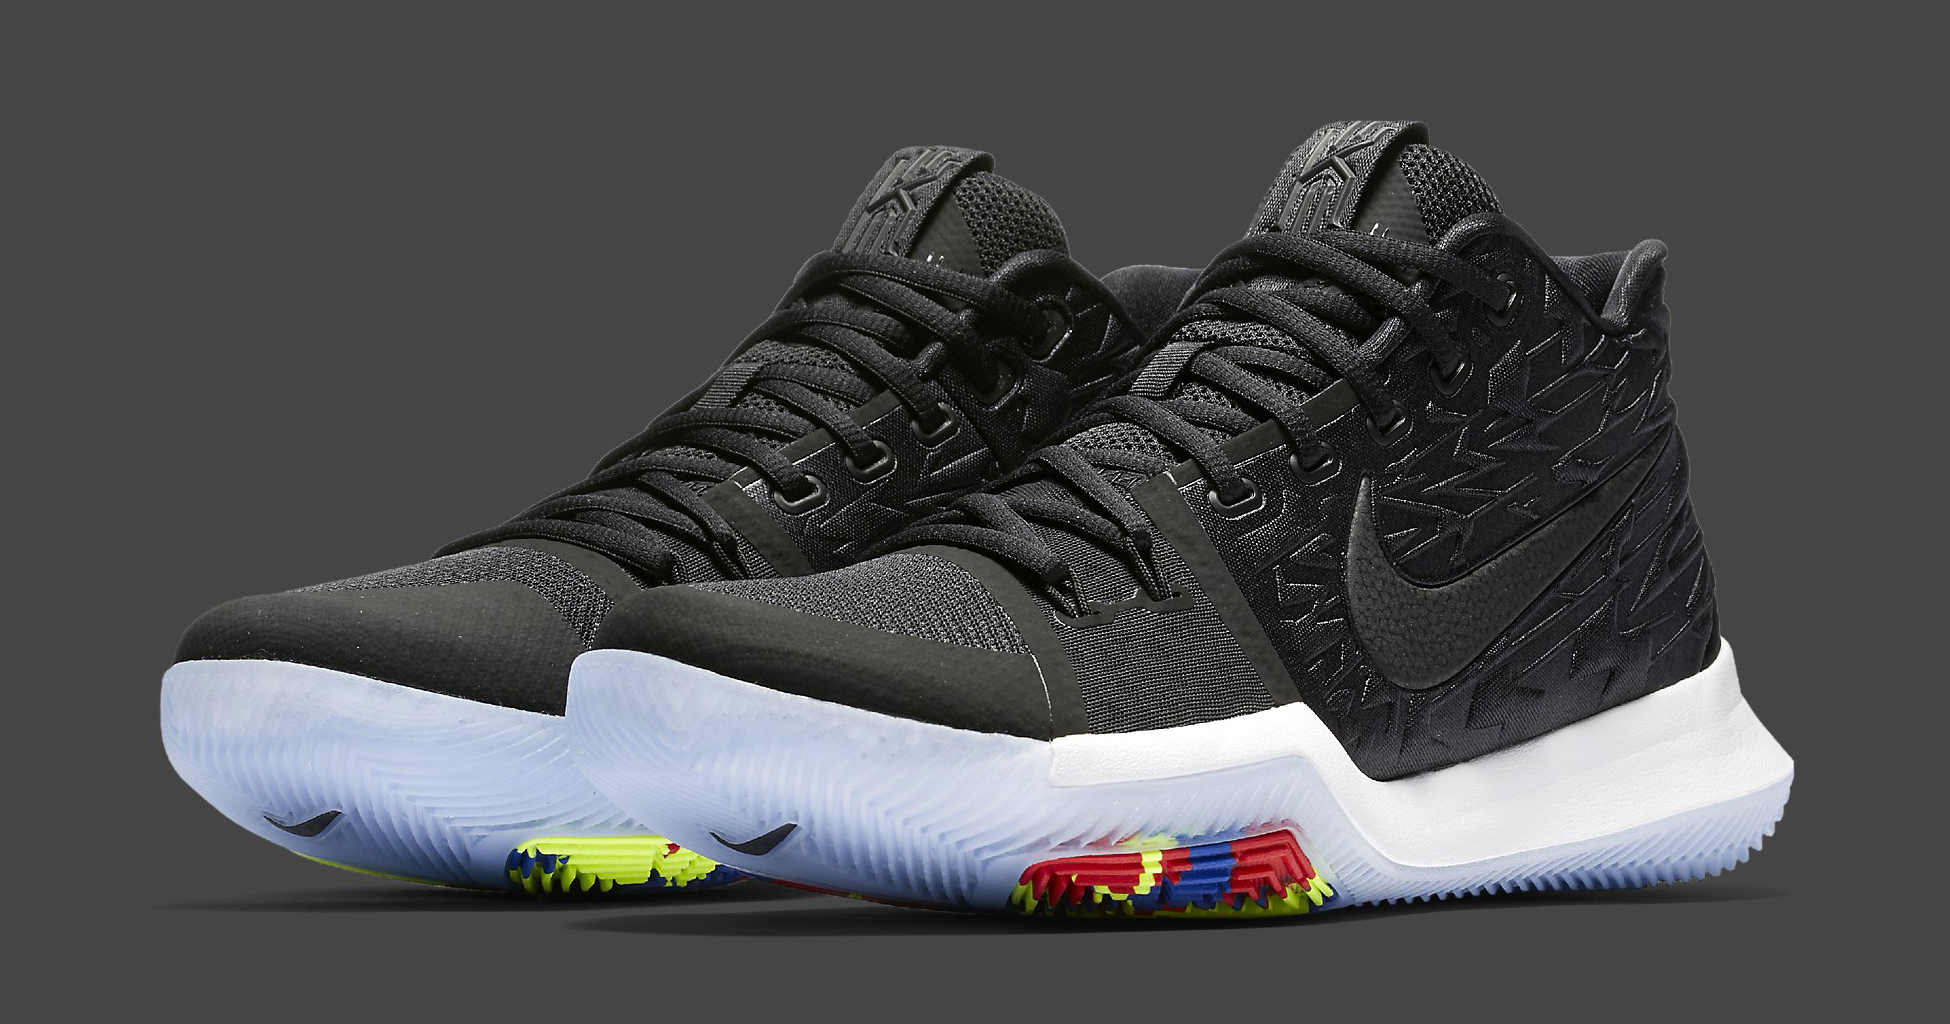 kyrie 3 effect